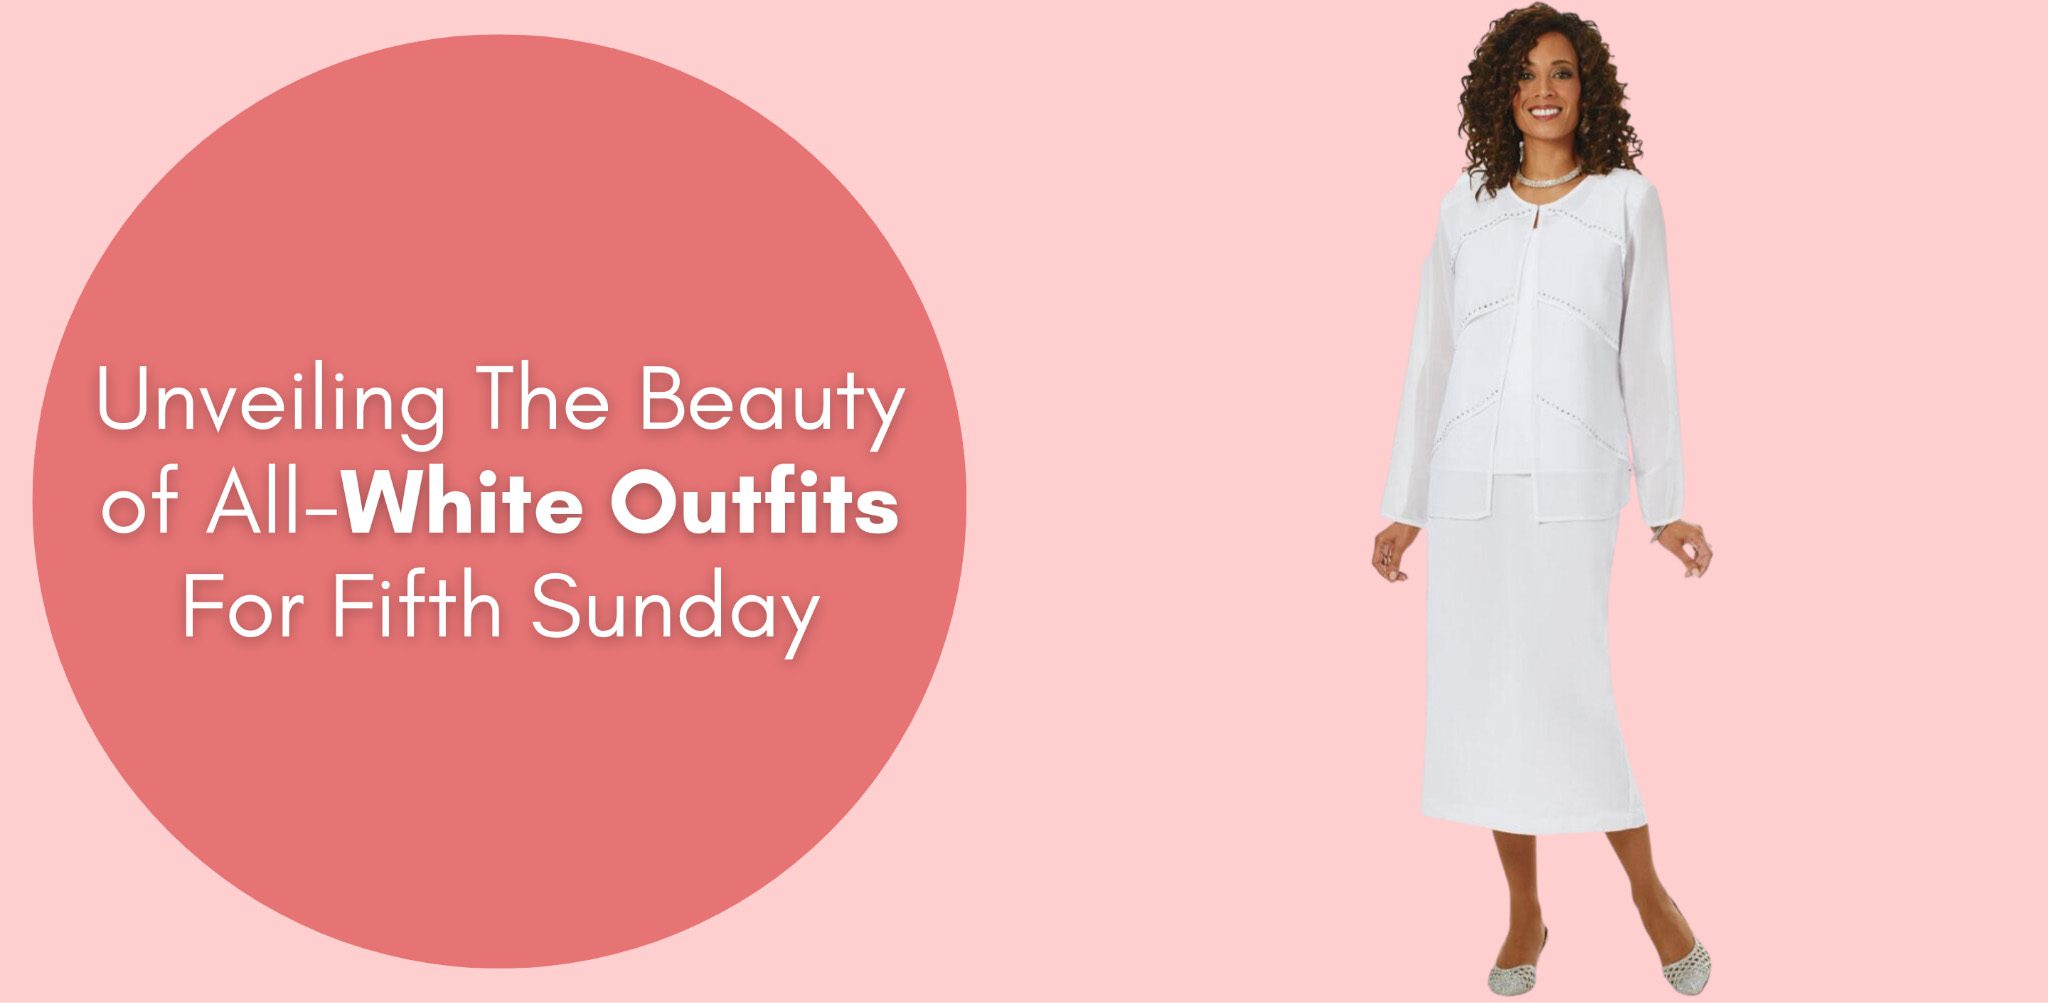 Unveiling The Beauty of All-White Outfits For Fifth Sunday